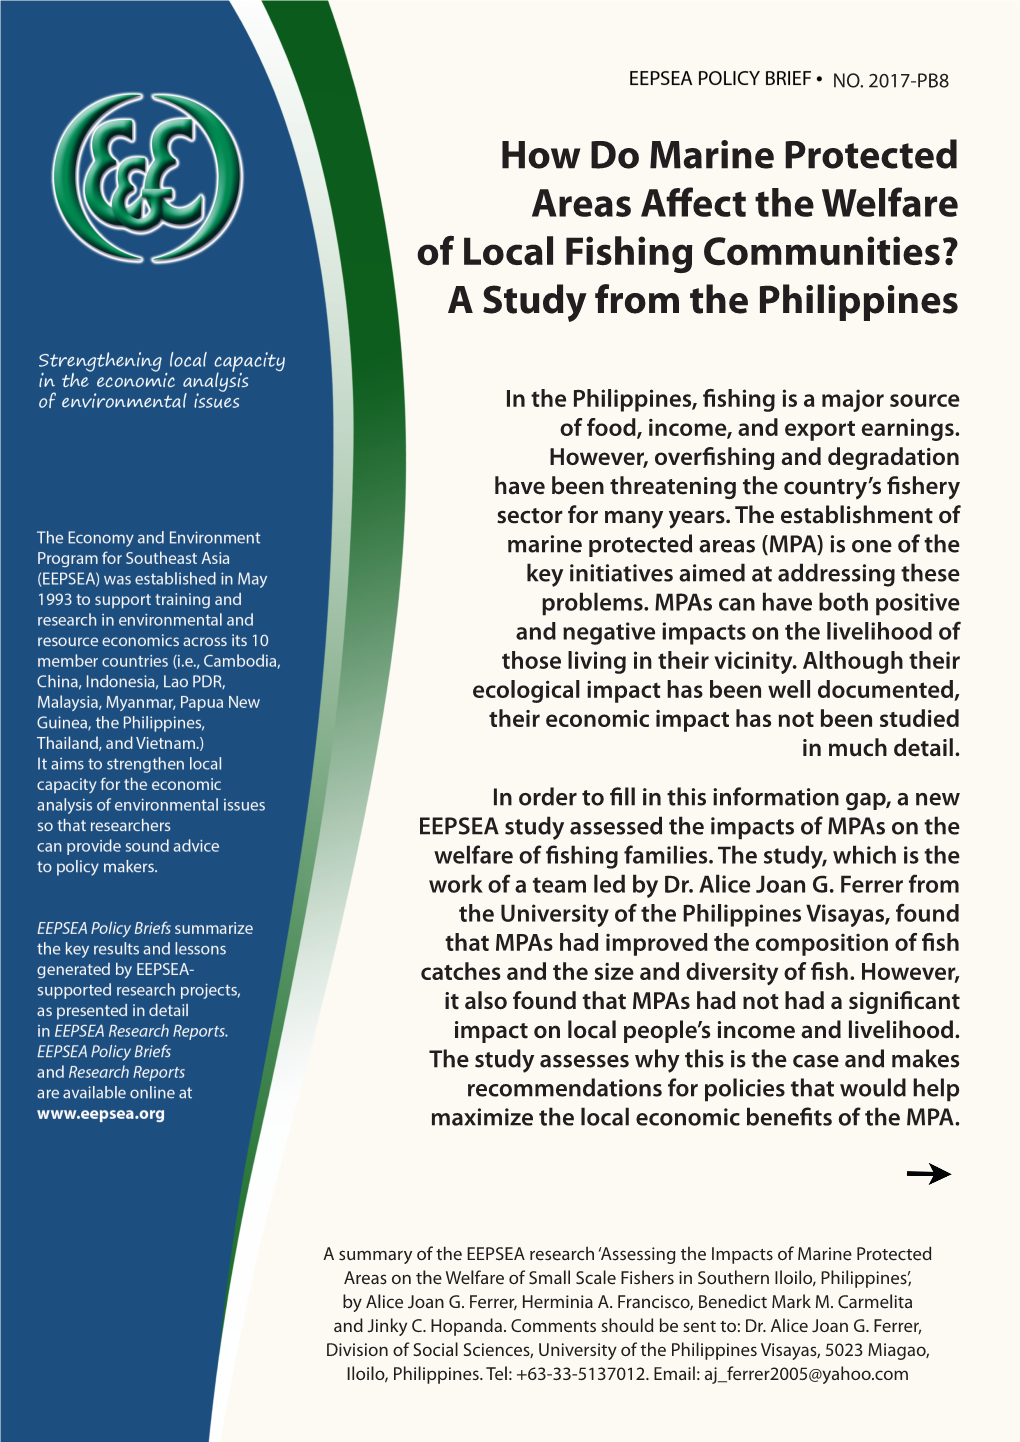 How Do Marine Protected Areas Affect the Welfare of Local Fishing Communities? a Study from the Philippines